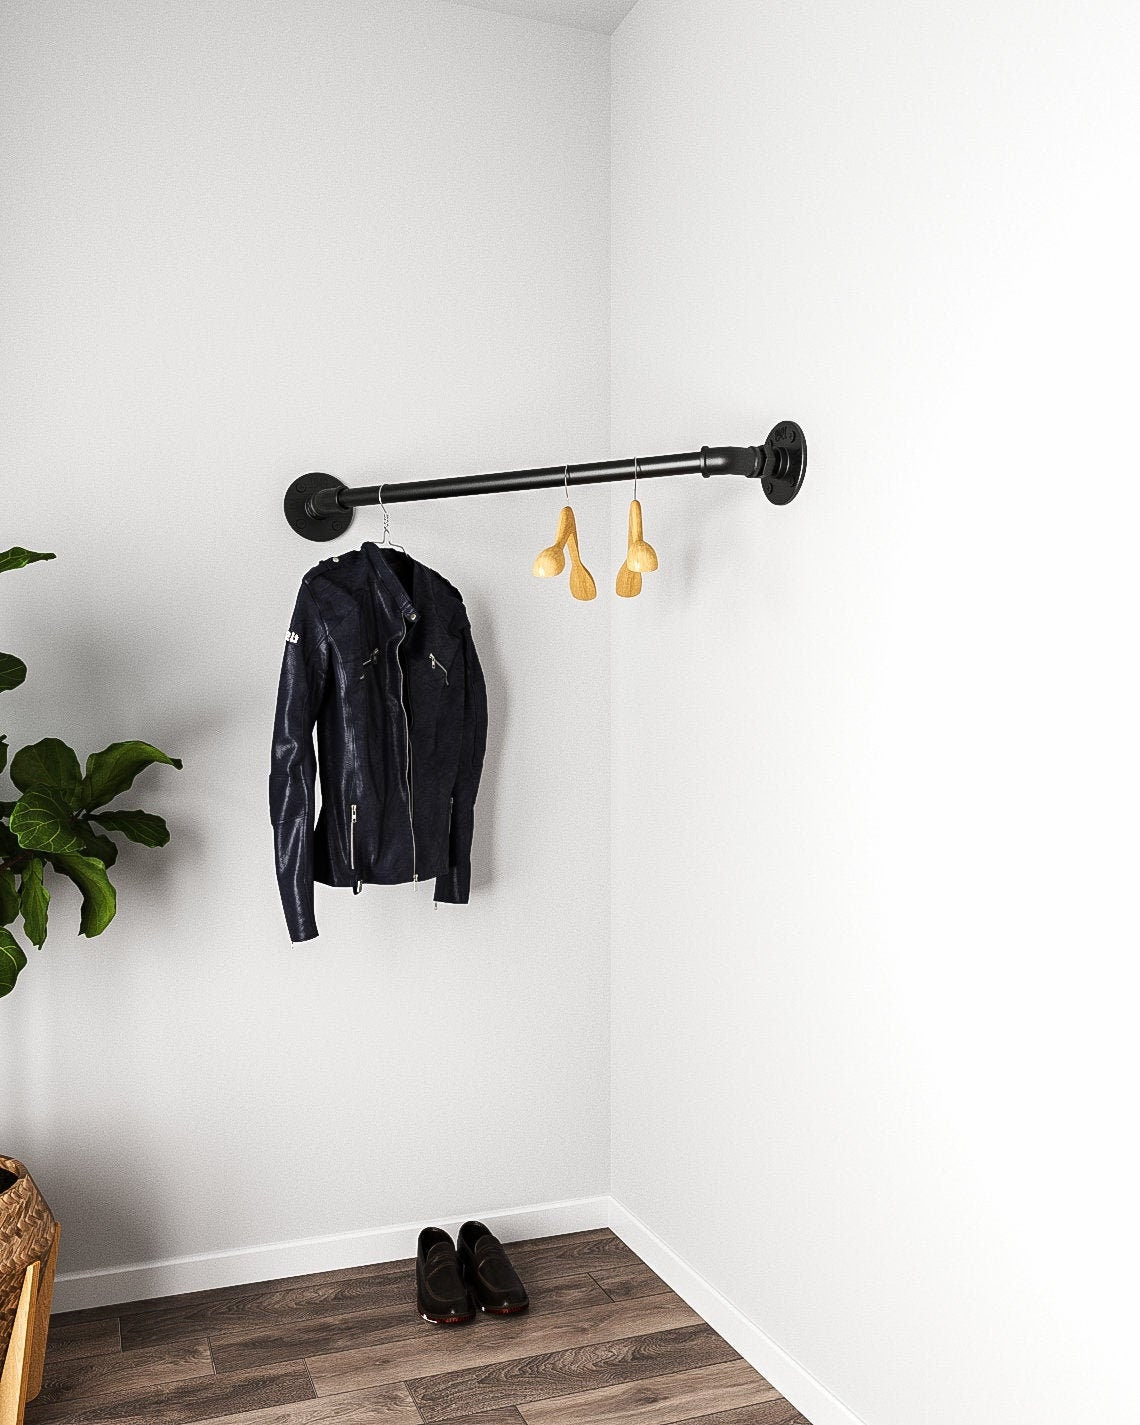 Amos Corner Industrial Pipe Wall Mounted Clothes Rack, a sturdy and customizable clothes hanger rack.